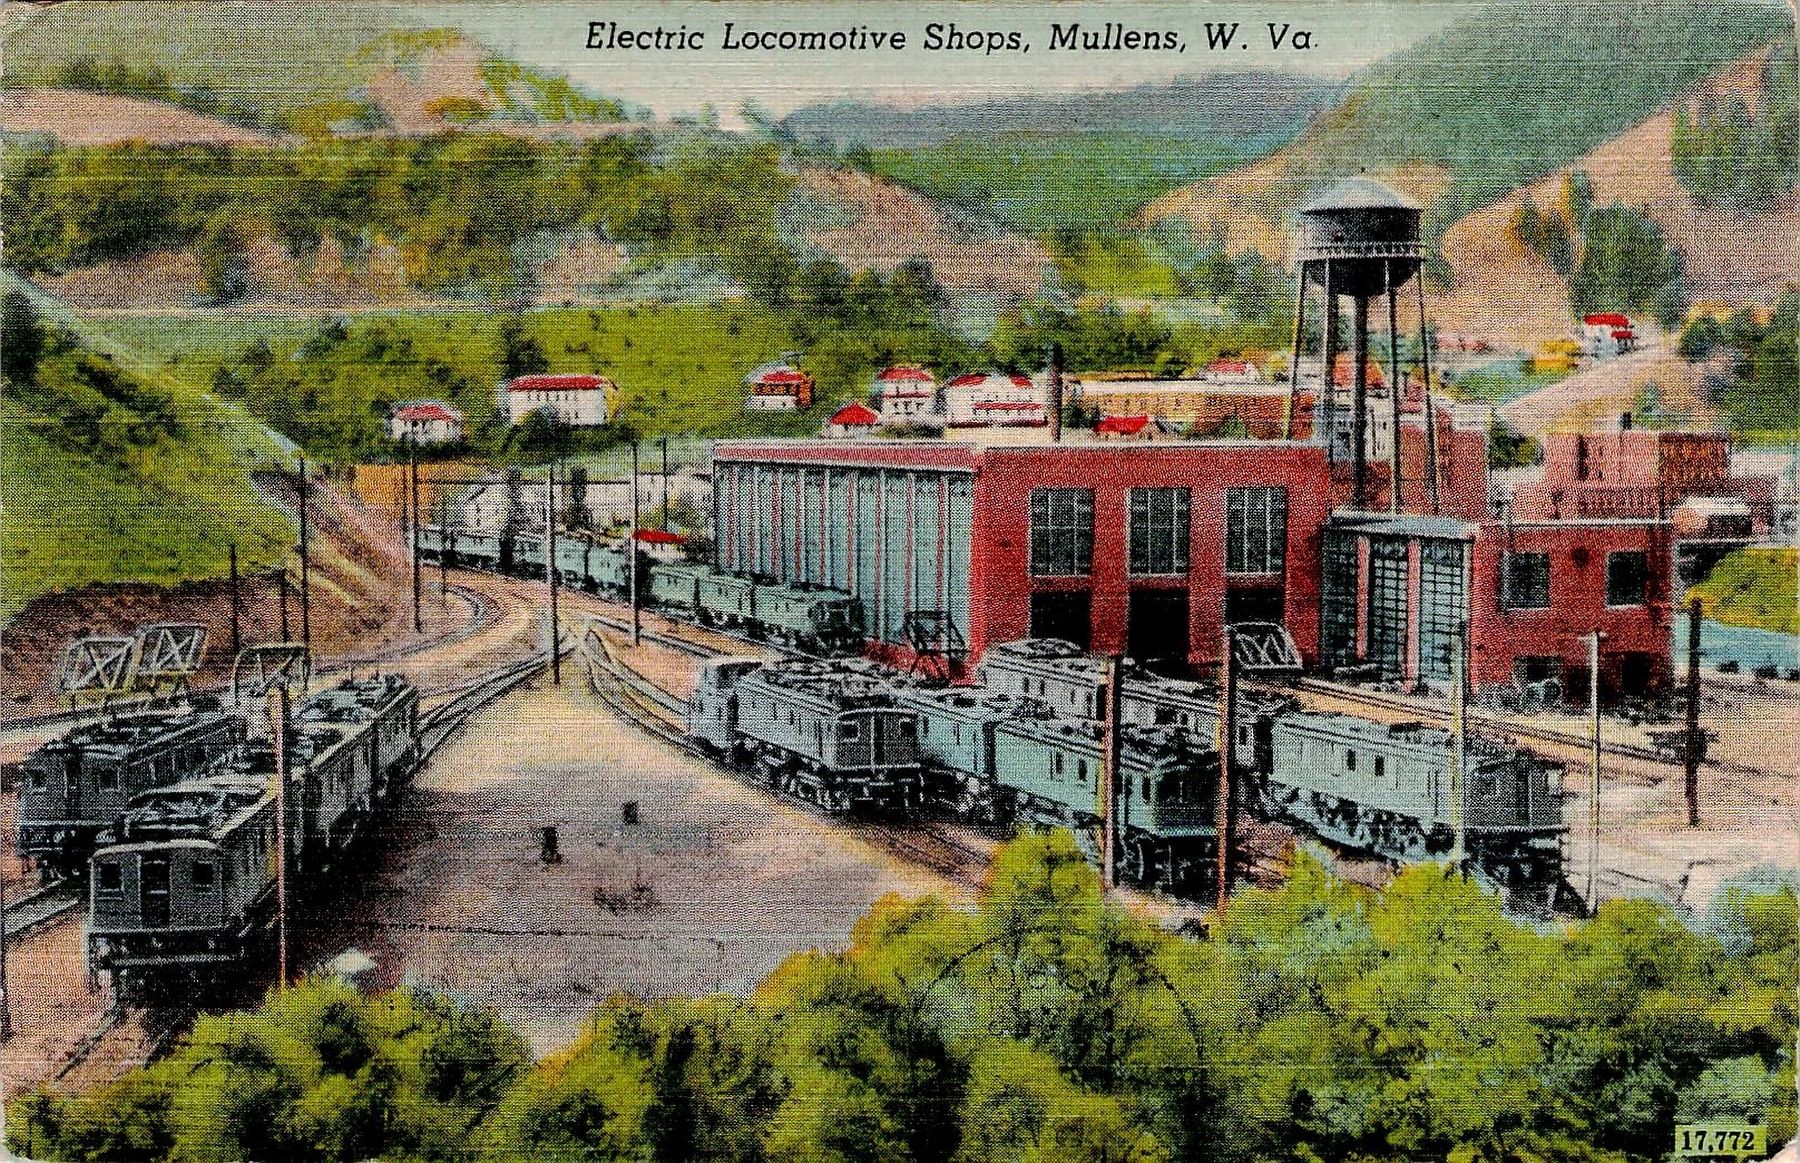 Electric Locomotive Shops, Mullens, W.Va. image. Click for full size.